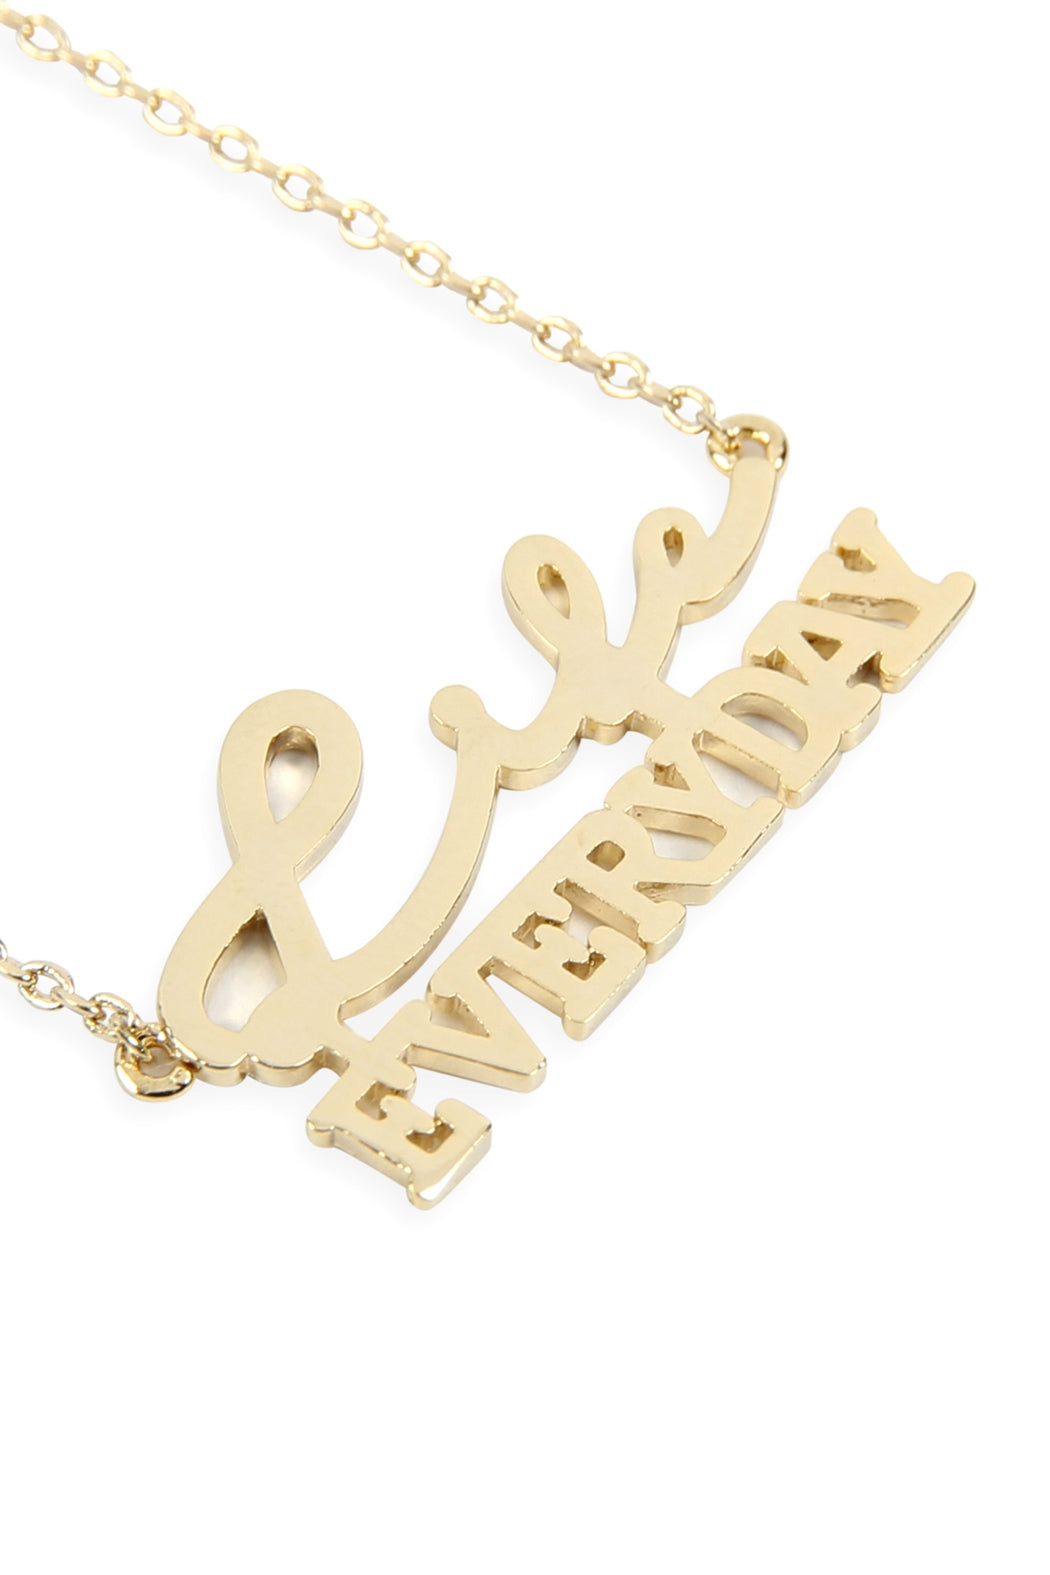 LIFE EVERYDAY NECKLACE